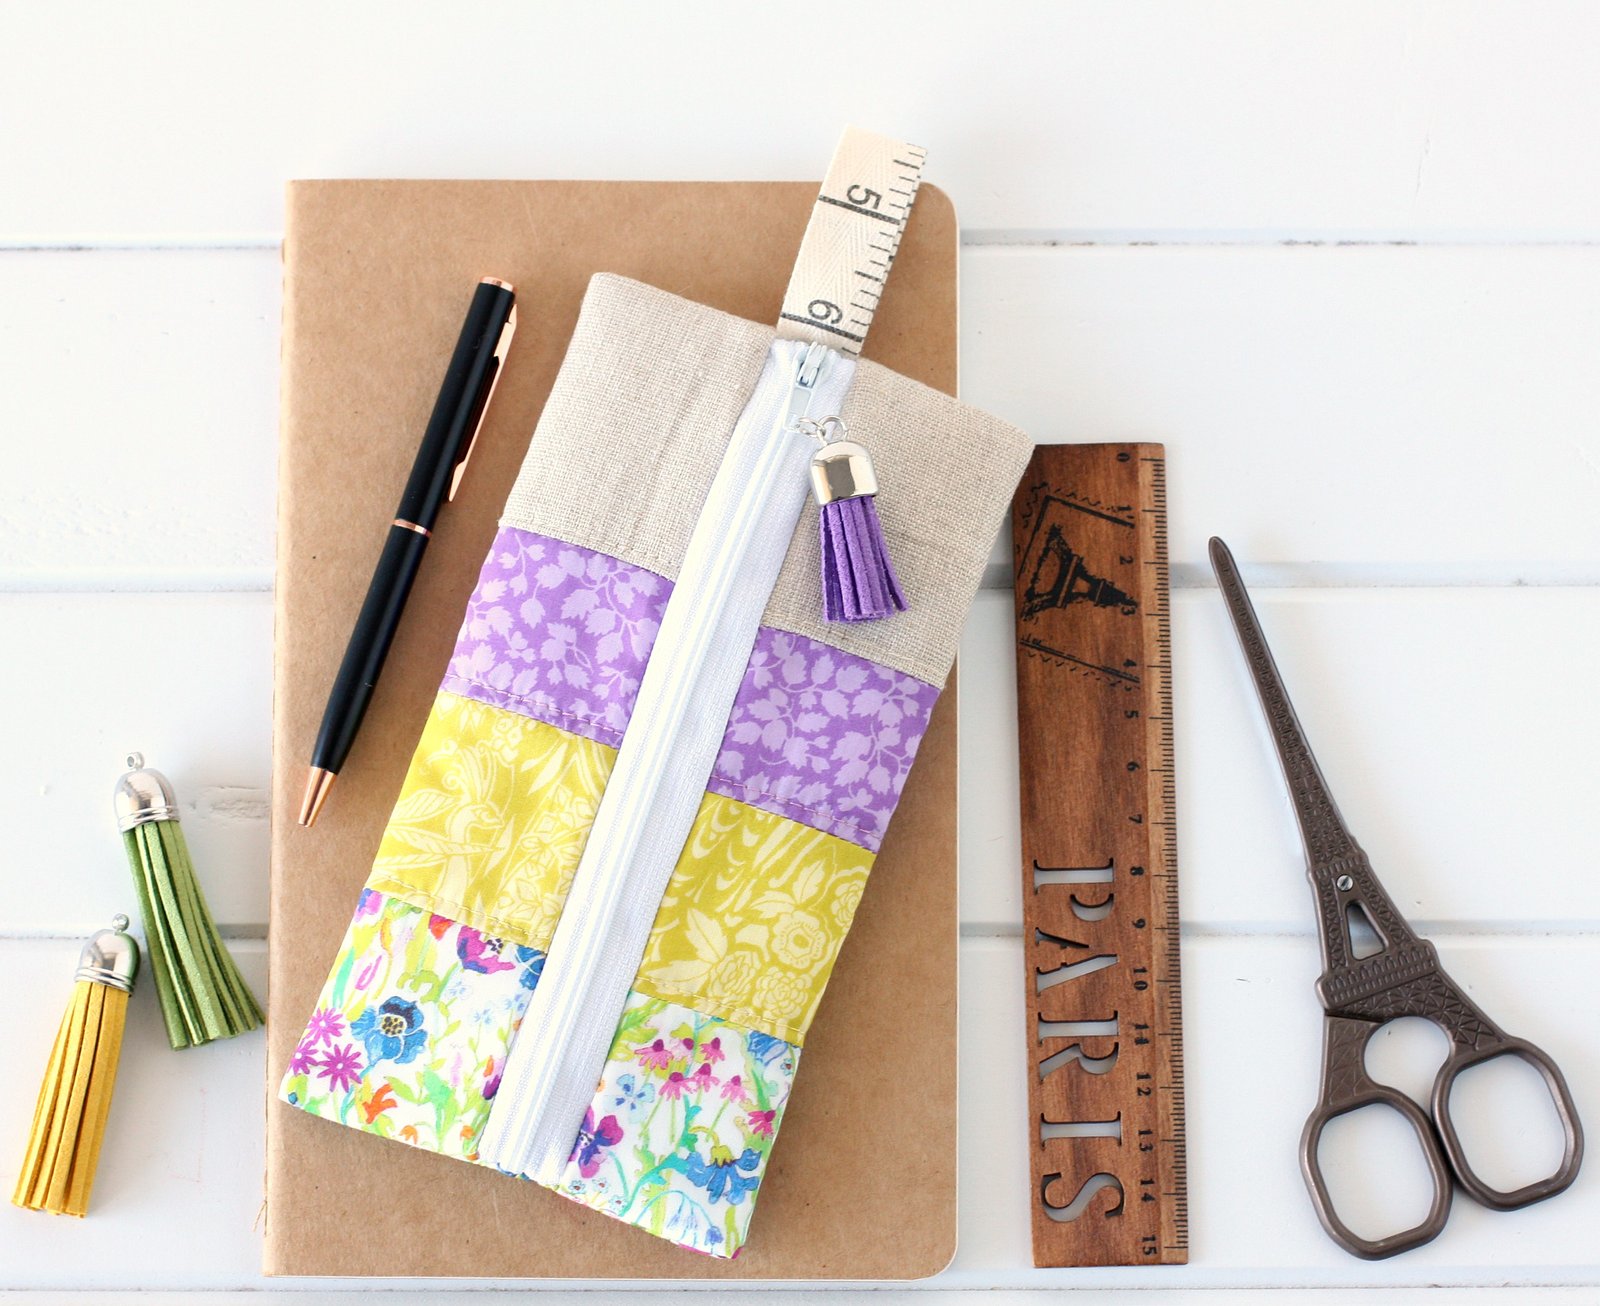 Liberty Pencil Case made using a free tutorial from A Spoonful of Sugar